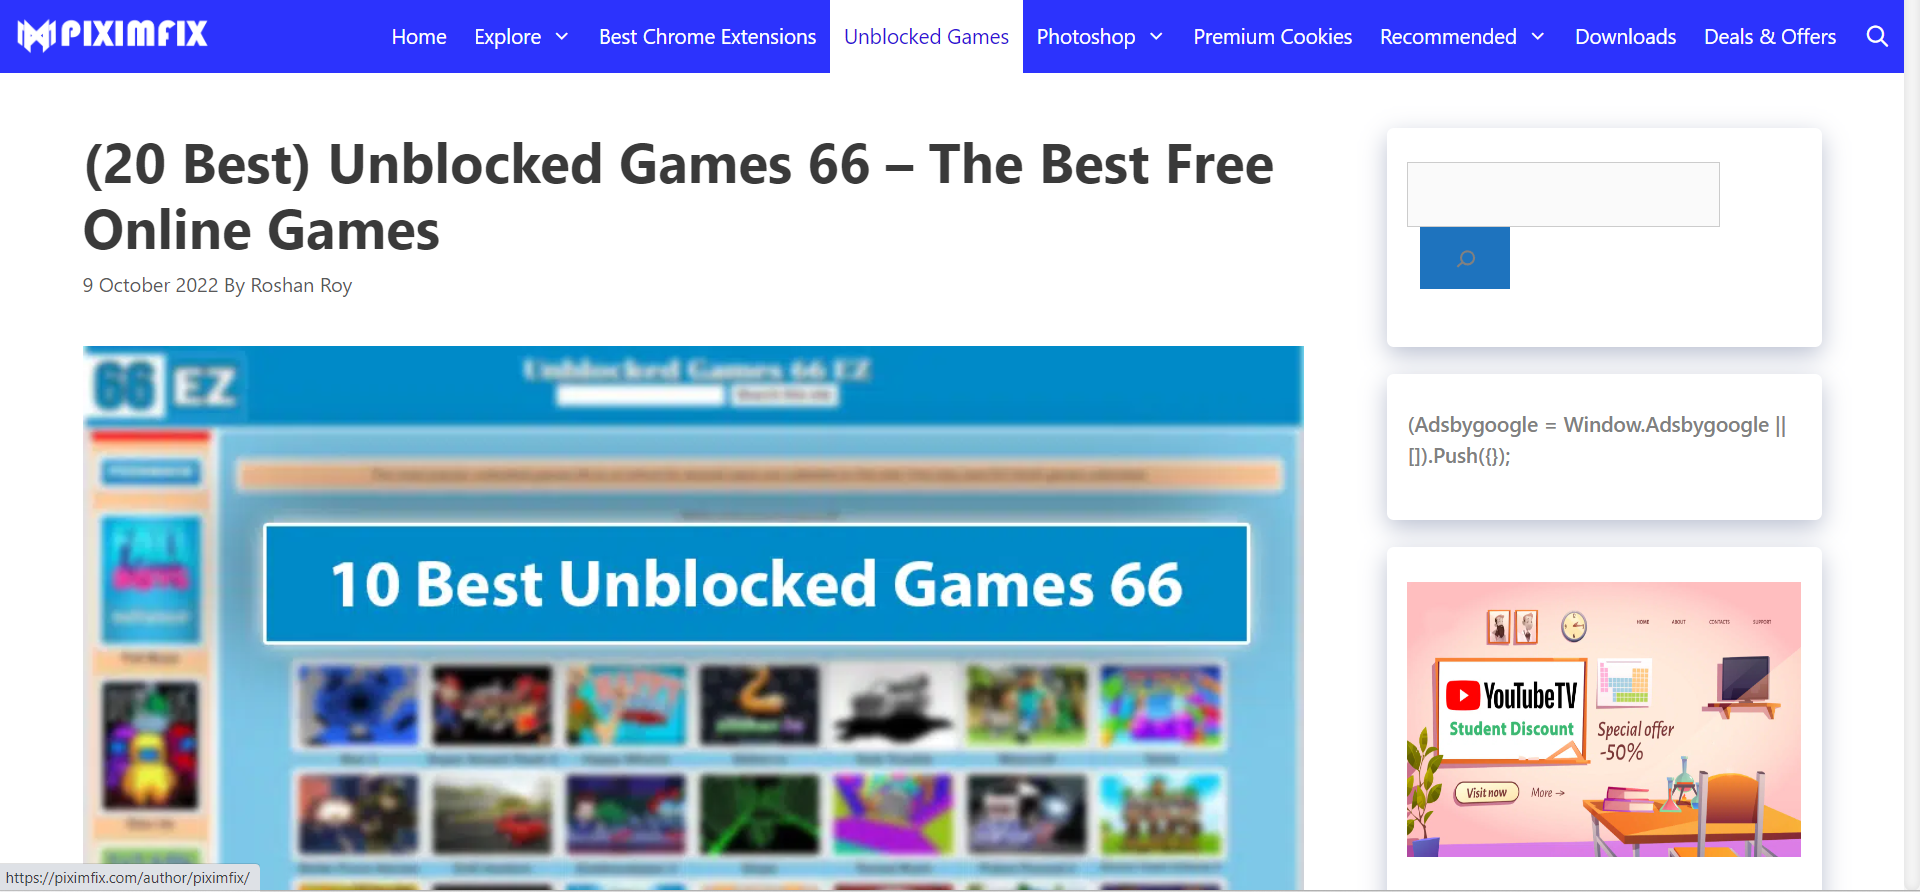 Play Anywhere, Anytime with Unblocked Games 66, 66EZ!